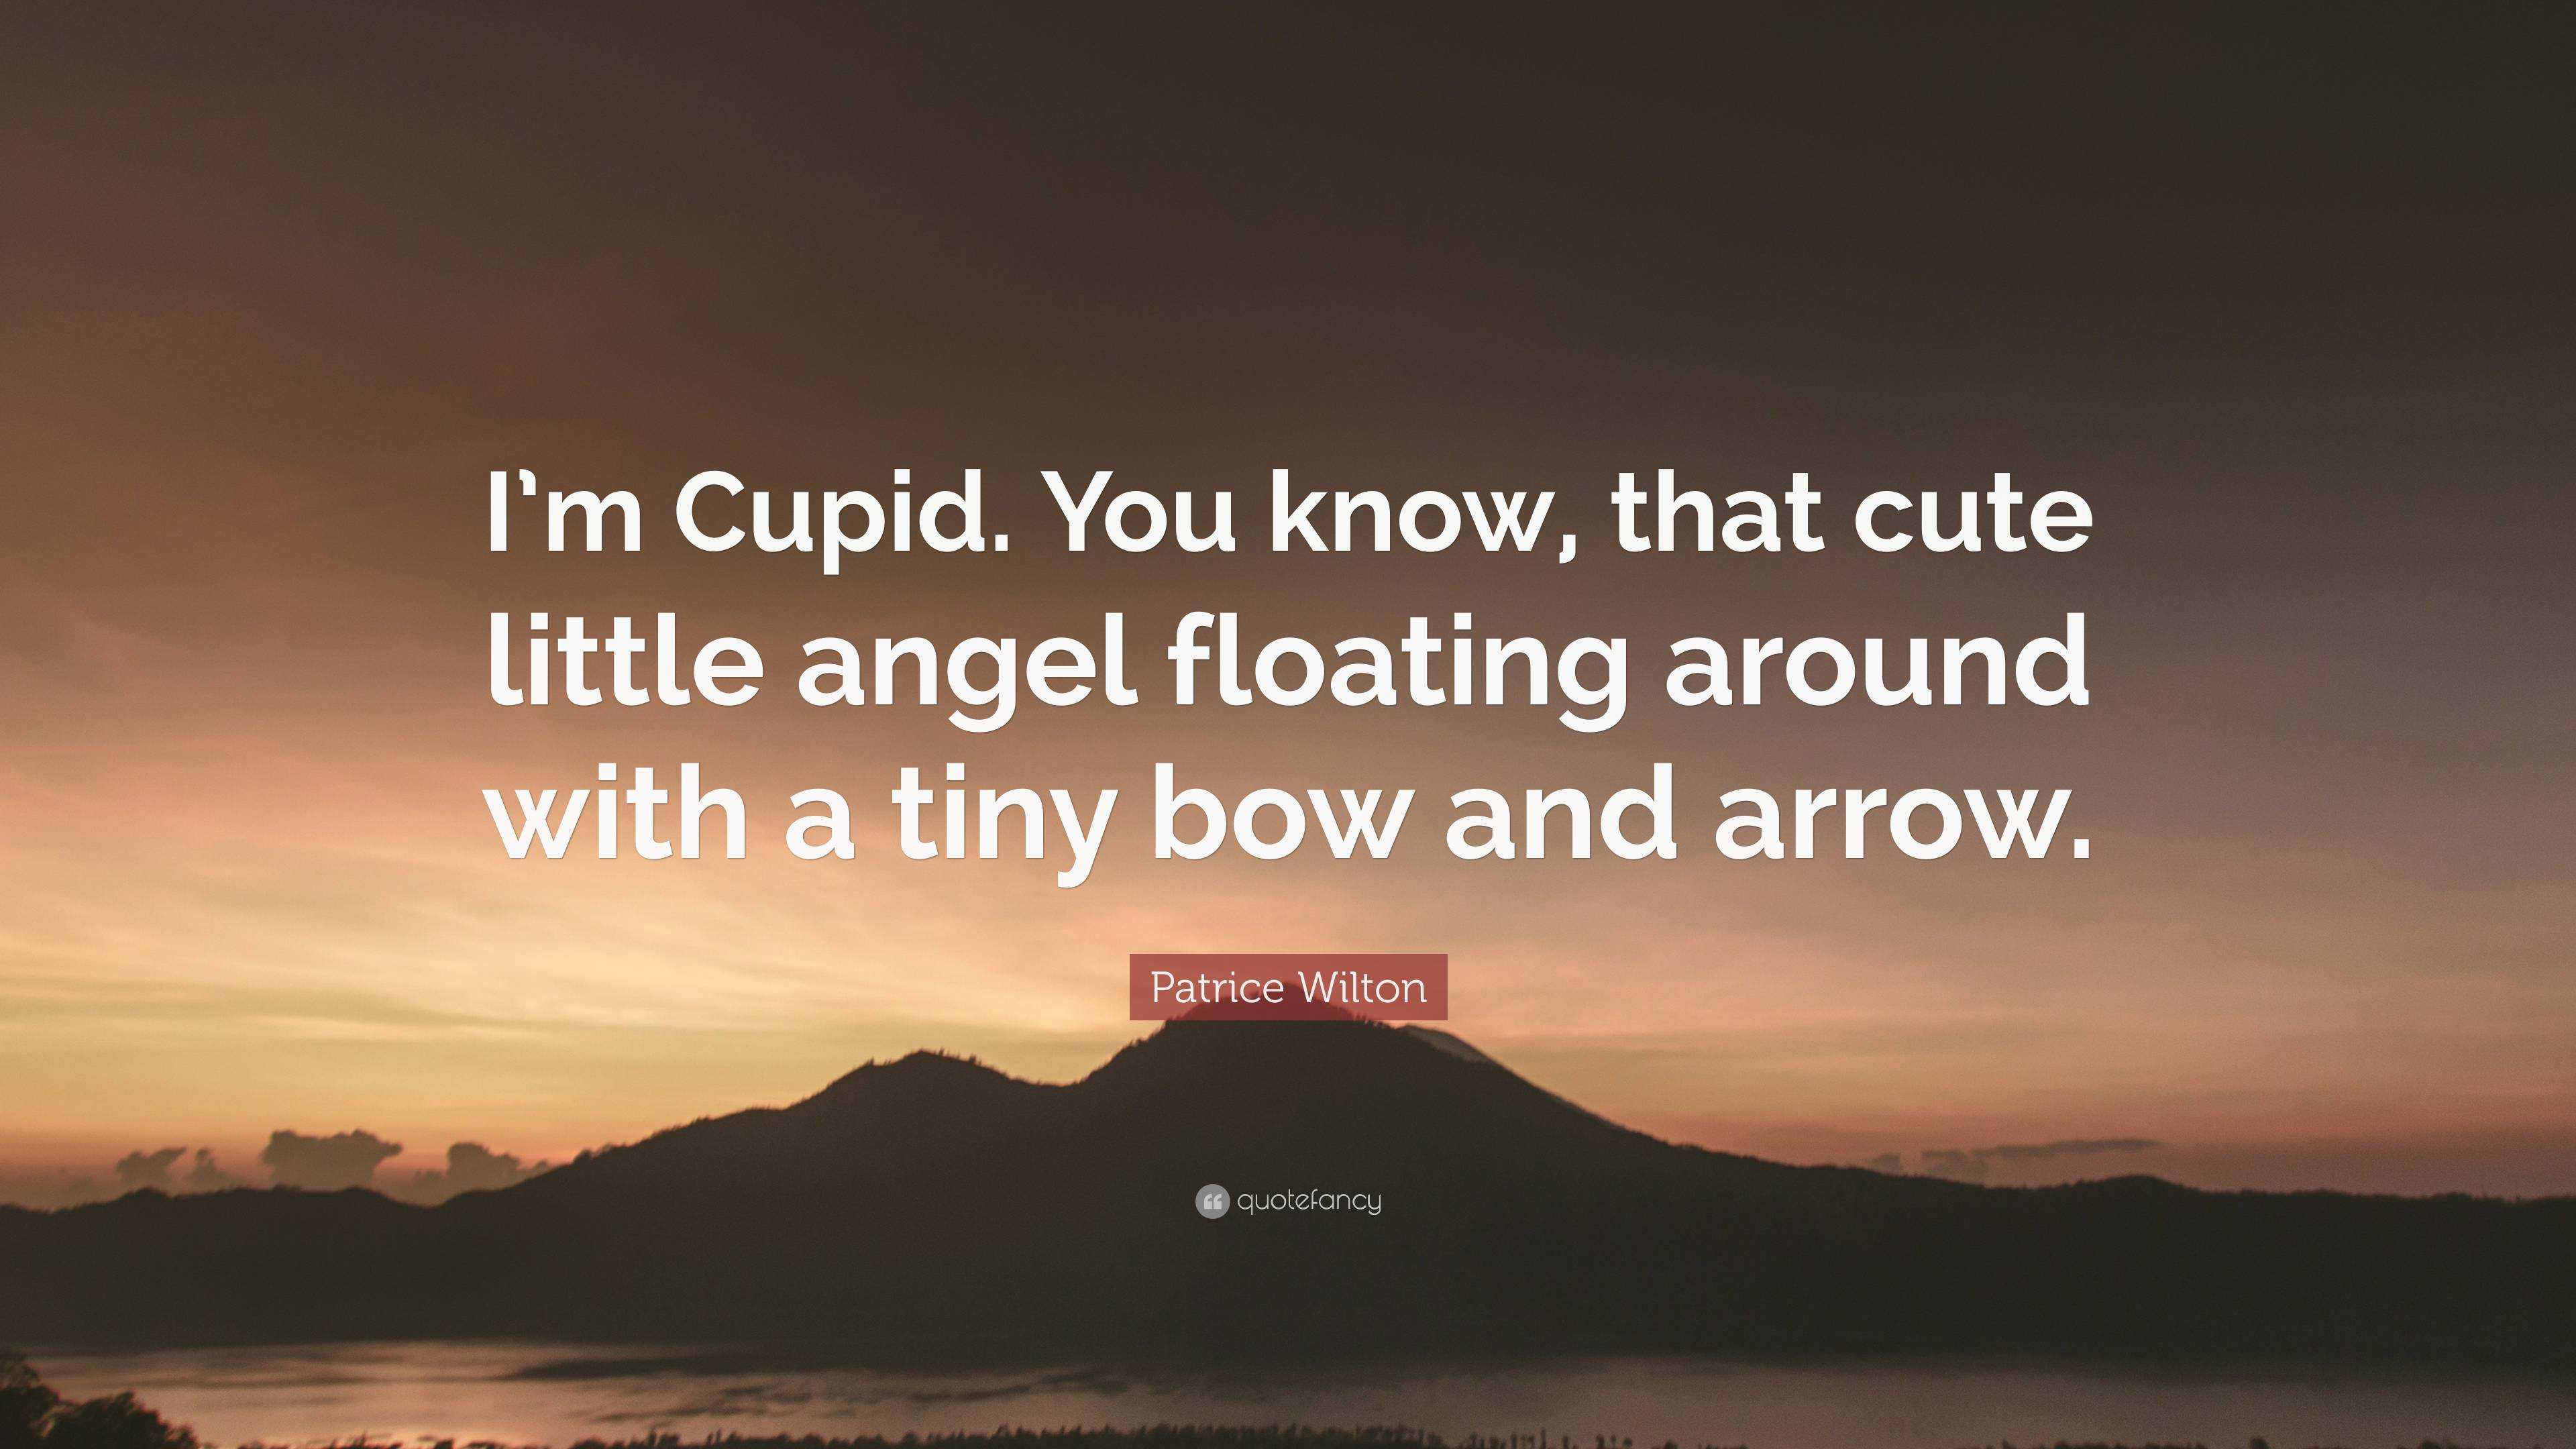 https://quotefancy.com/media/wallpaper/3840x2160/6882566-Patrice-Wilton-Quote-I-m-Cupid-You-know-that-cute-little-angel.jpg